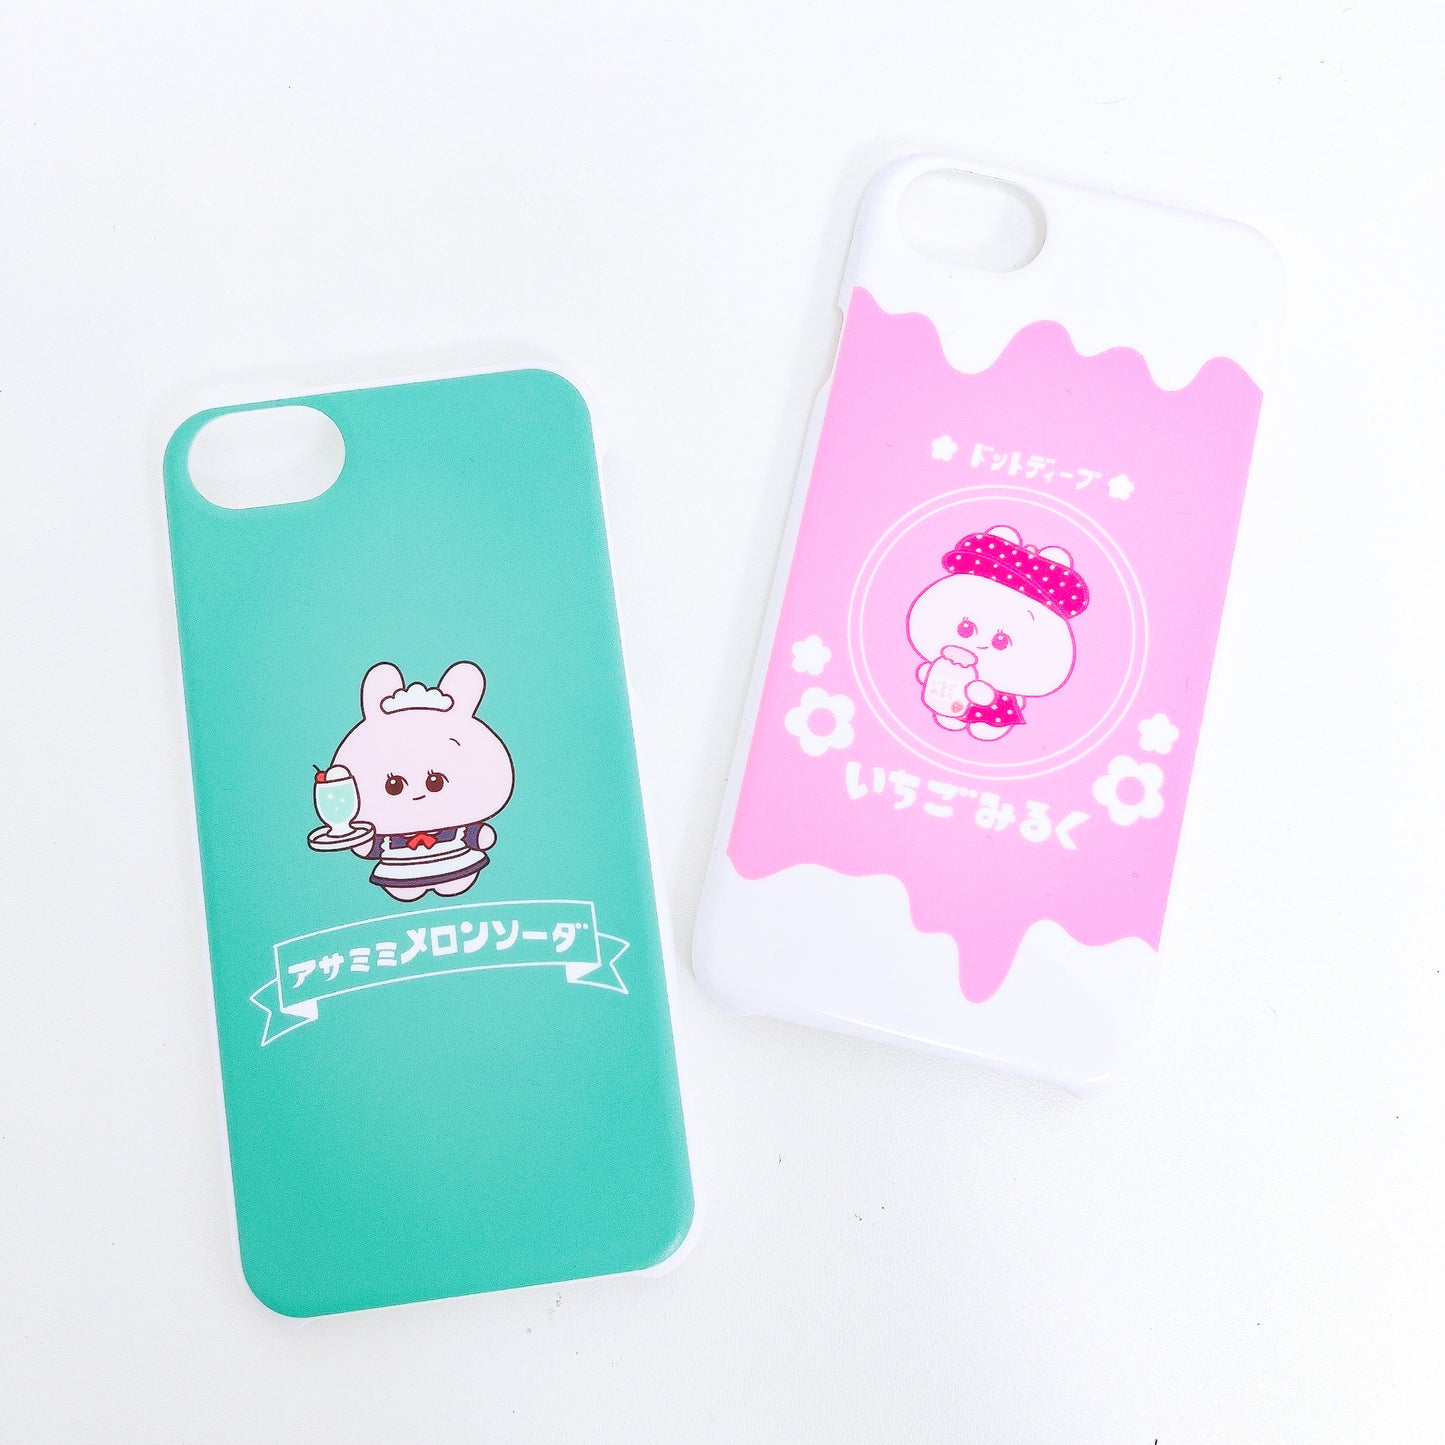 [Asamimi-chan] Smartphone case compatible with almost all models (melon soda) and others [Made to order]